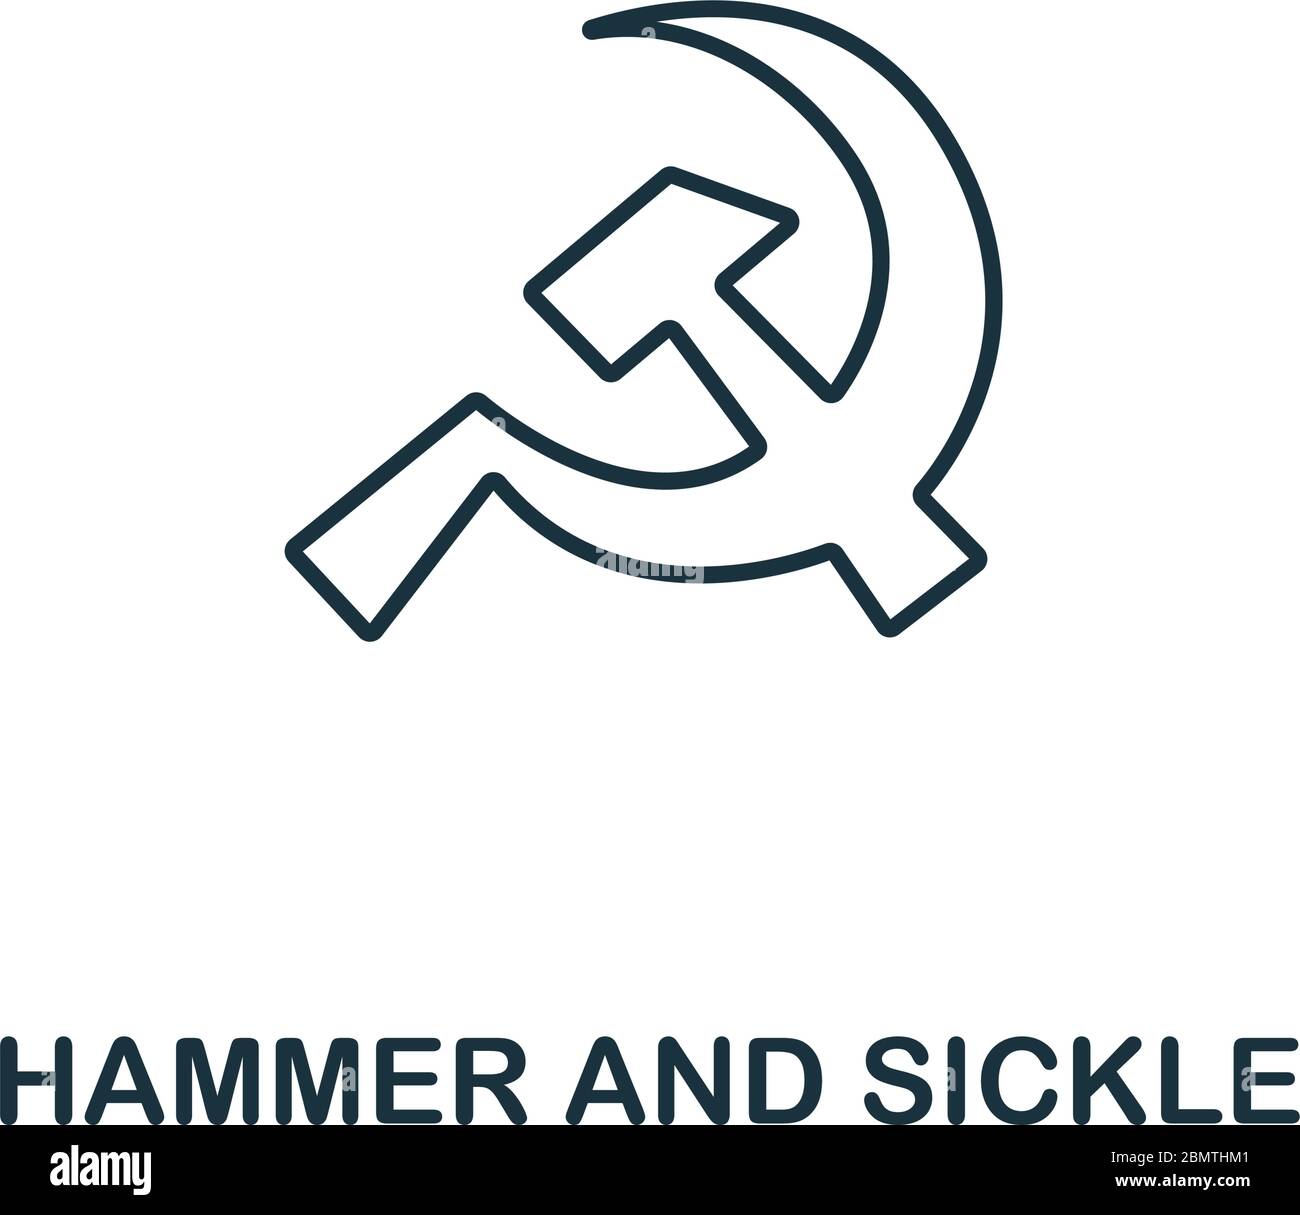 Hammer And Sickle Emblem Badge Ussr High Resolution Stock Photography and  Images - Alamy